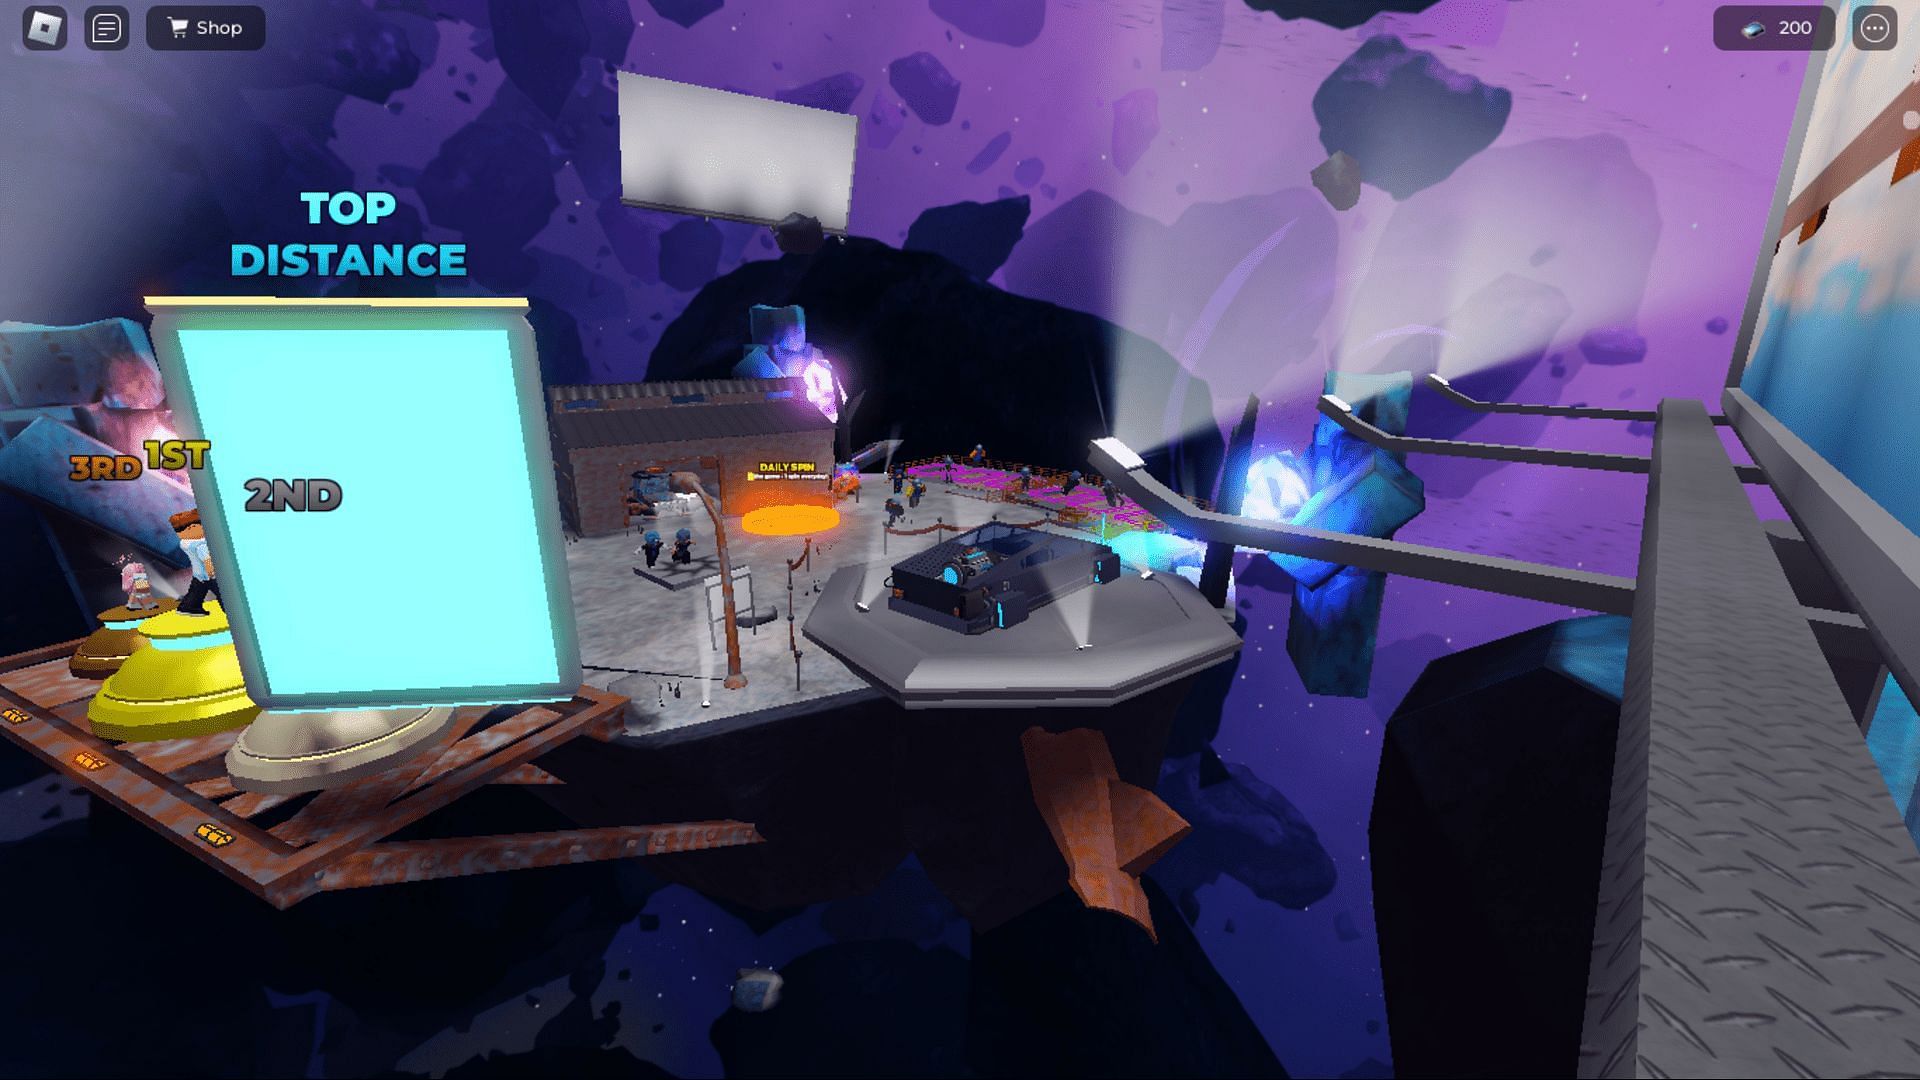 The spawning area in A Space Trip (Image via Roblox)